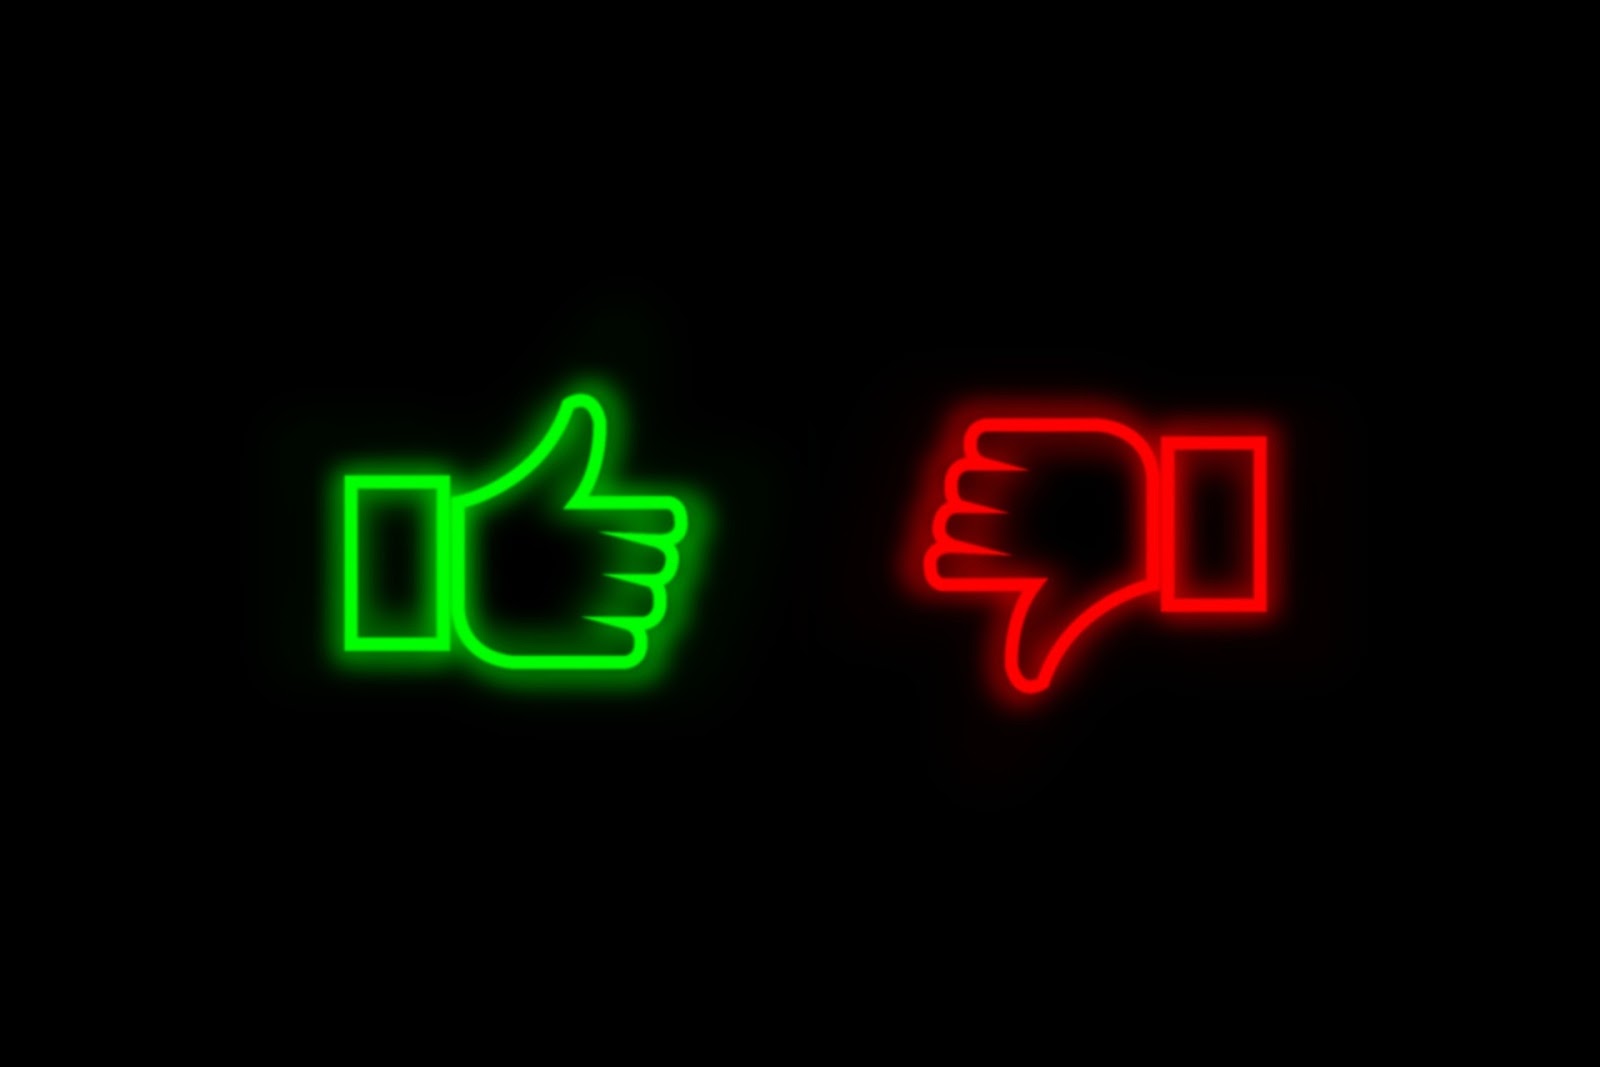 A neon green thumb pointing up on the left and a neon read thumb pointing down on the right.